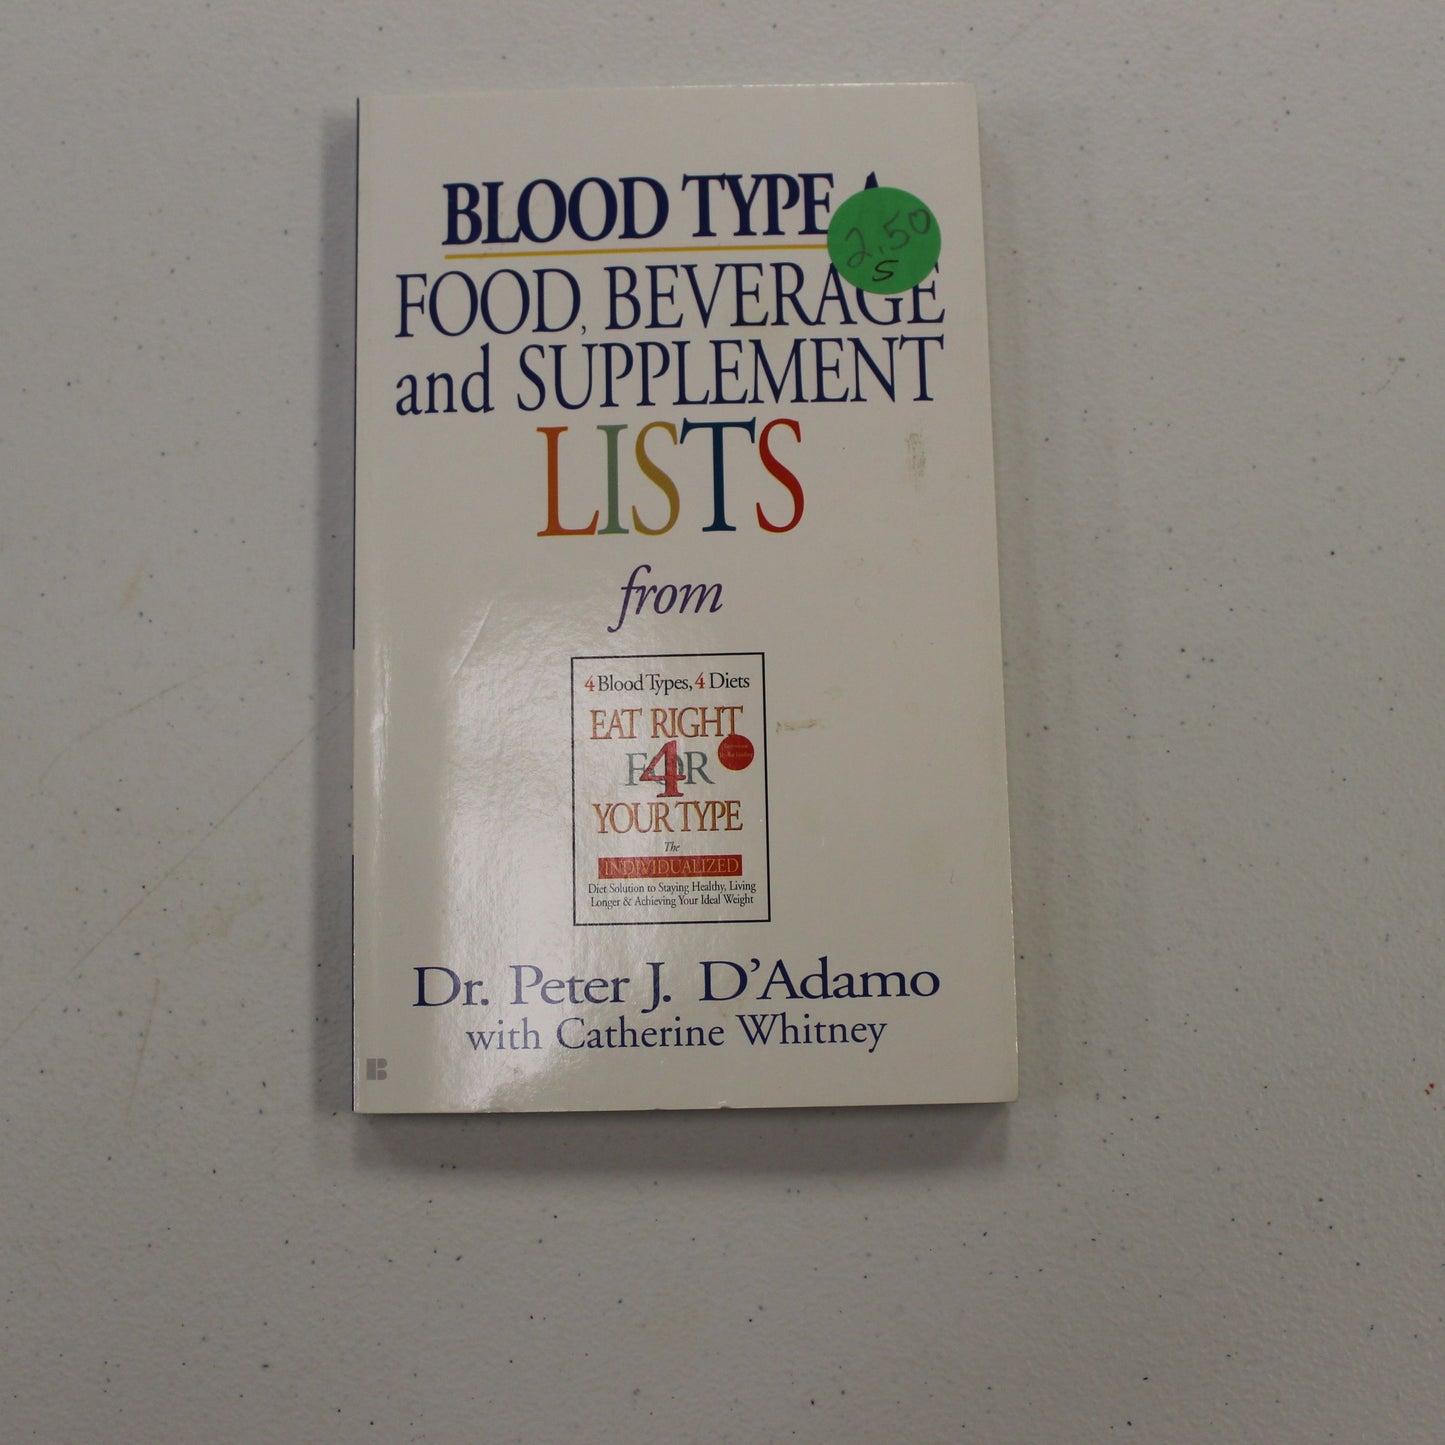 BLOOD TYPE A FOOD, BEVERAGE AND SUPPLEMENT LISTS